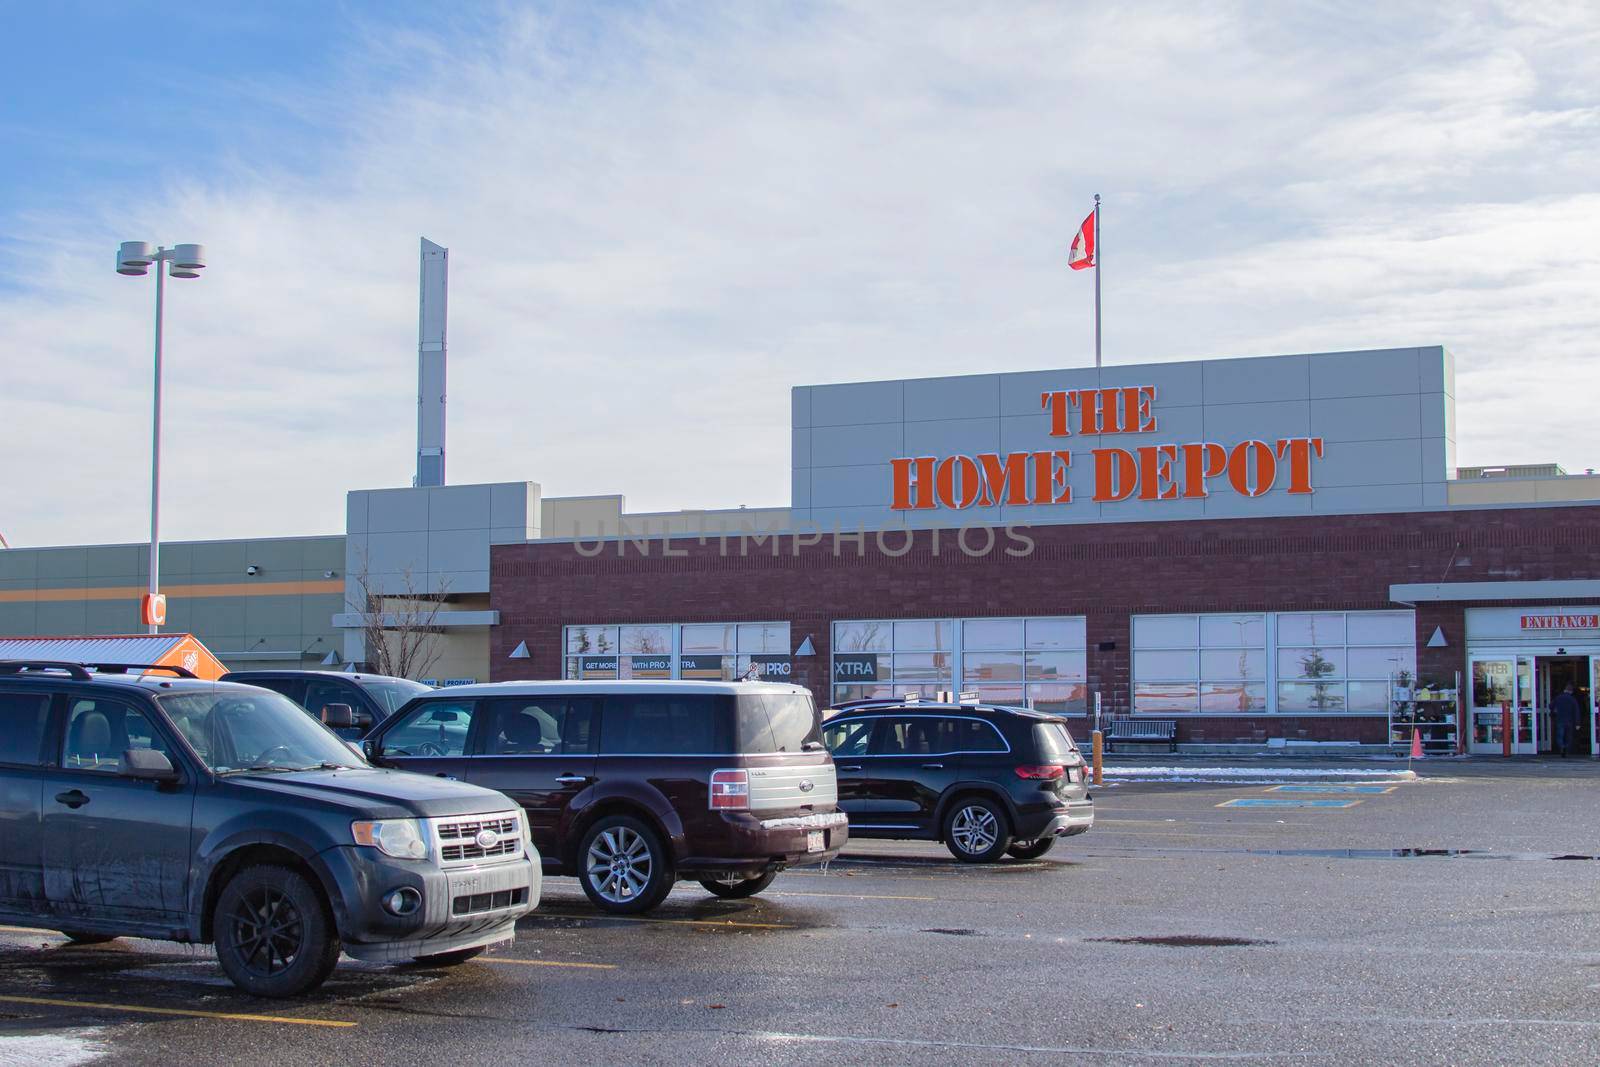 Calgary Alberta, Canada. Oct 17, 2020. The Home Depot is the largest home improvement retailer in the United States, supplying tools, construction products, and services.